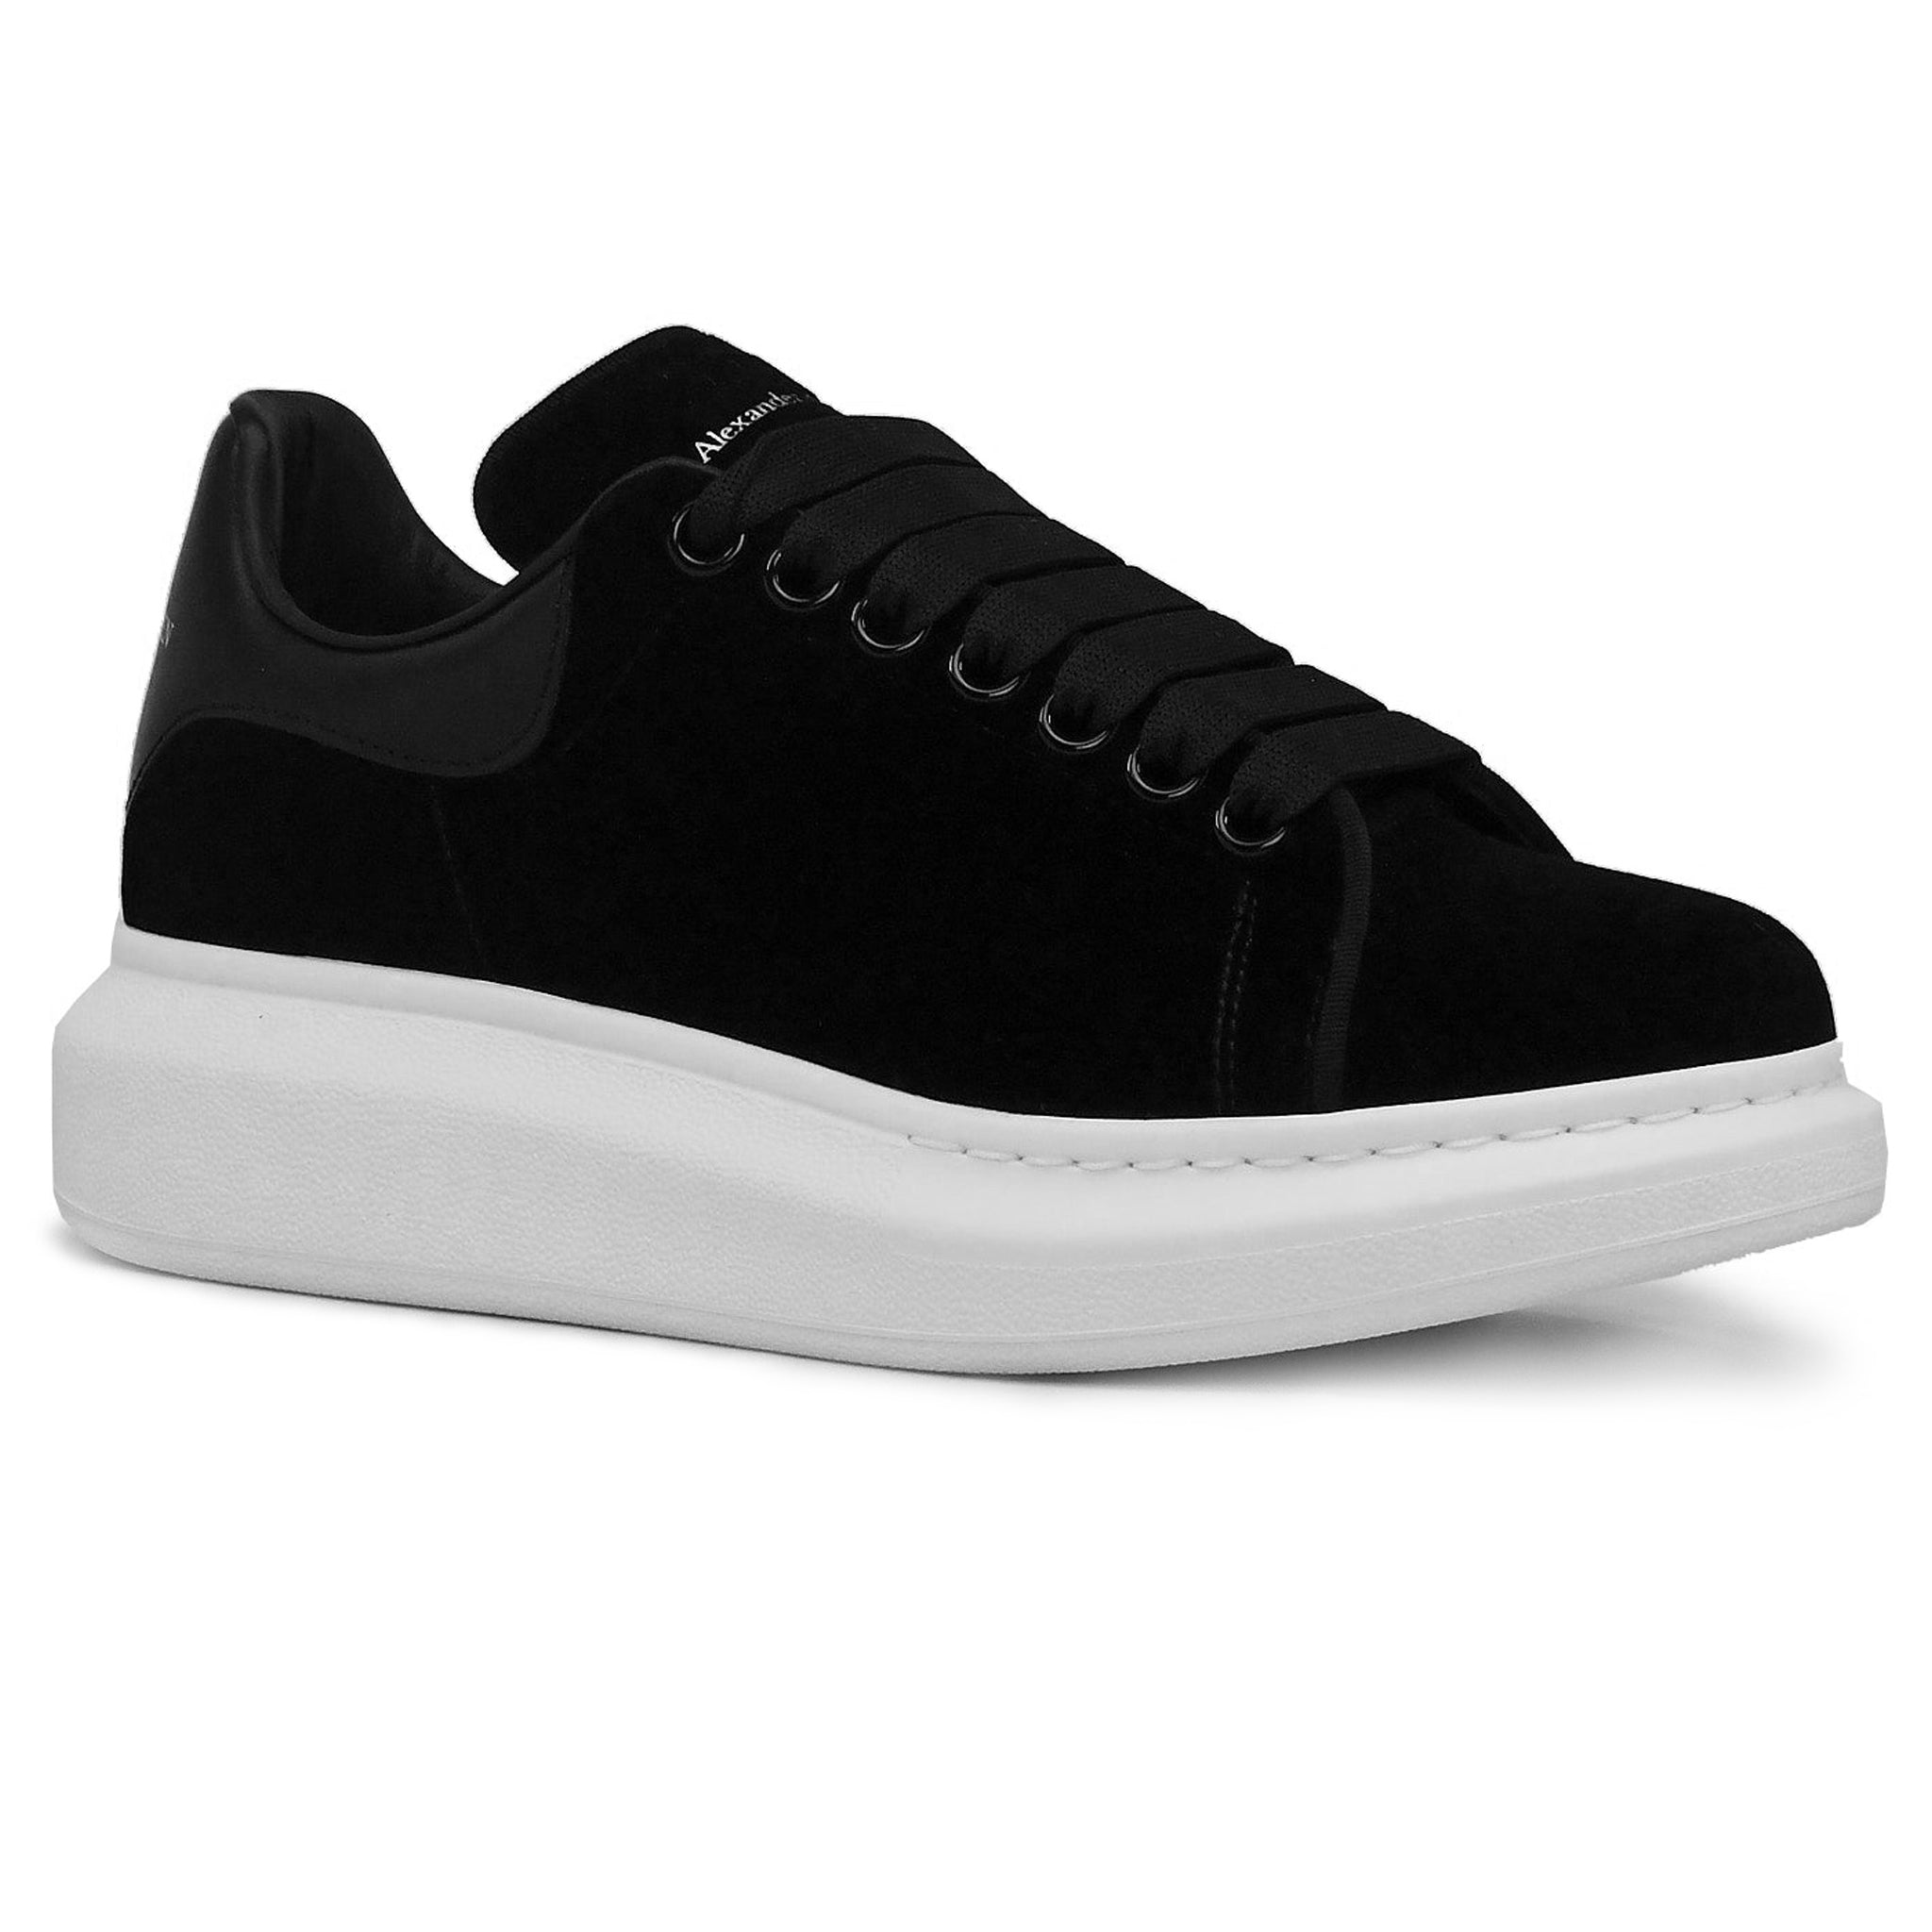 Front side view of Alexander Mcqueen Raised Sole Black Velvet Trainers